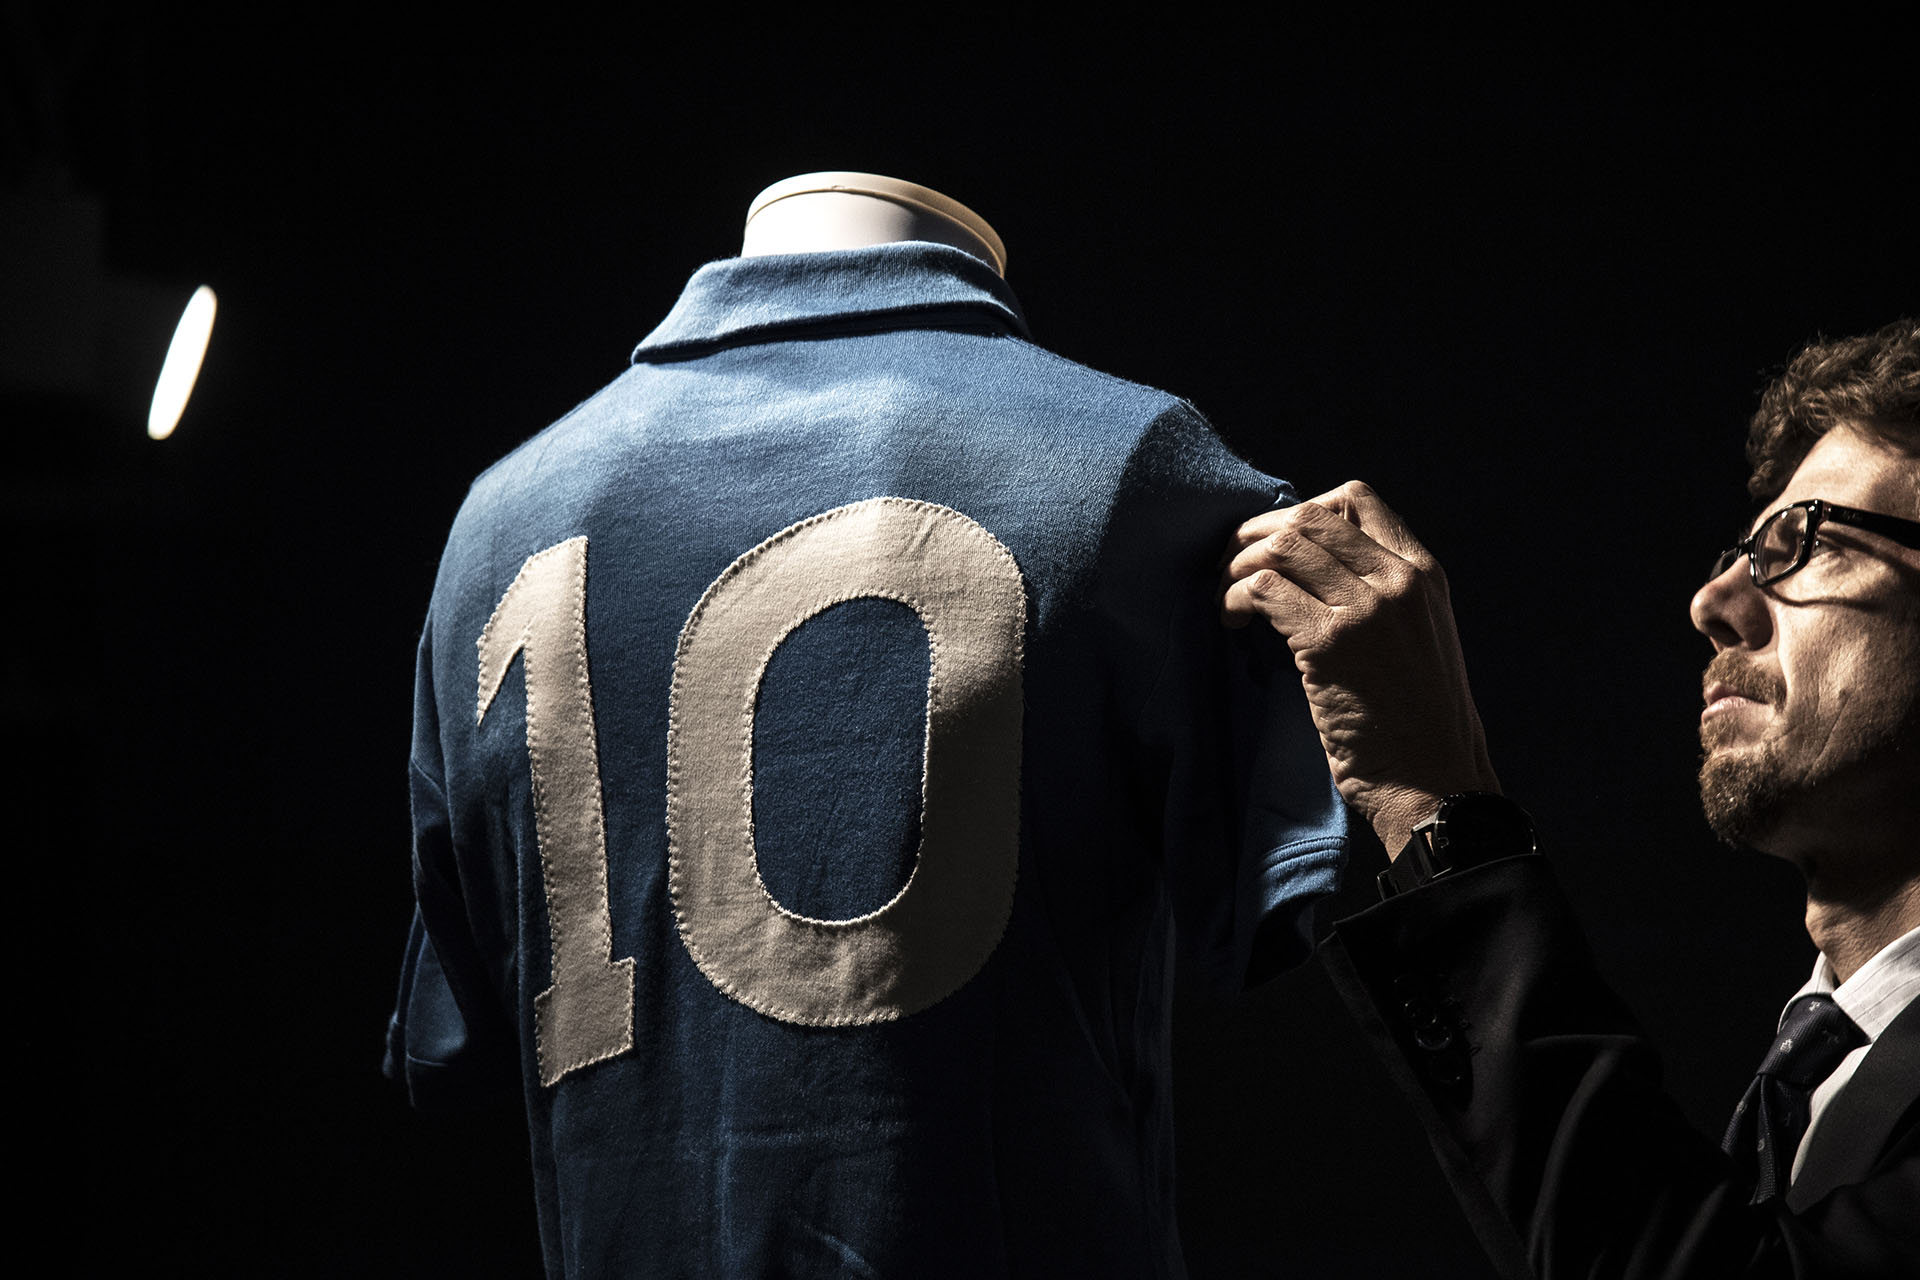 A man displays a S.S.C. Napoli football jersey worn by Argentina's football legend Diego Armando Maradona during the 1986-1987 season, from the collection "Football Memorabilia" at the Aste Bolaffi auction house in Turin on December 4, 2018. (Photo by MARCO BERTORELLO / AFP)